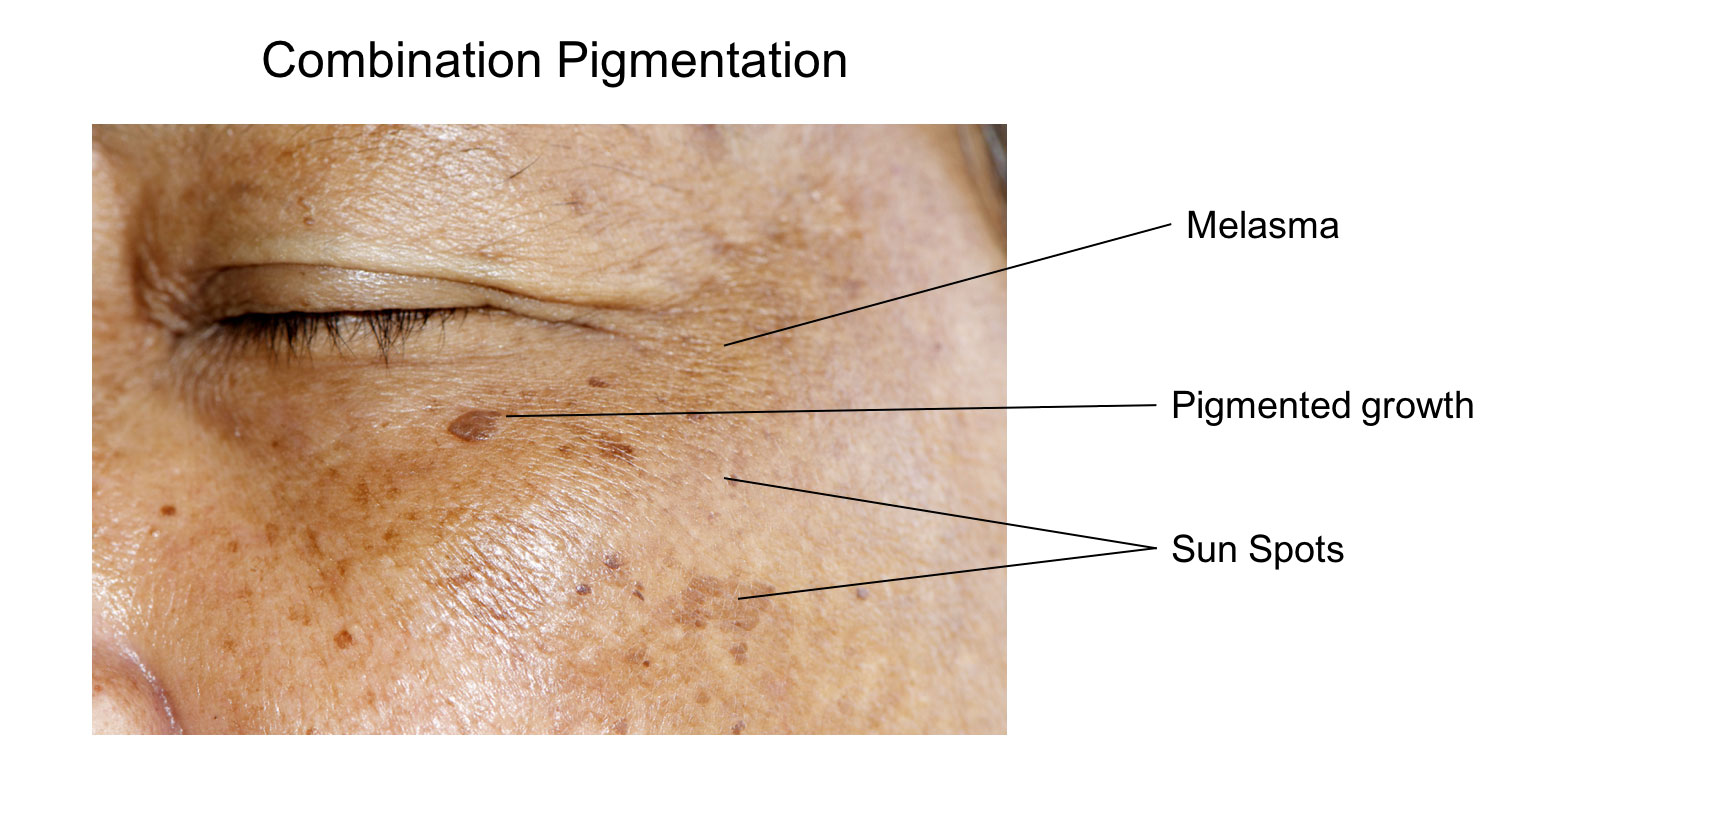 Pigments on face can be a combination of melasma, pigemented growth, sun spots